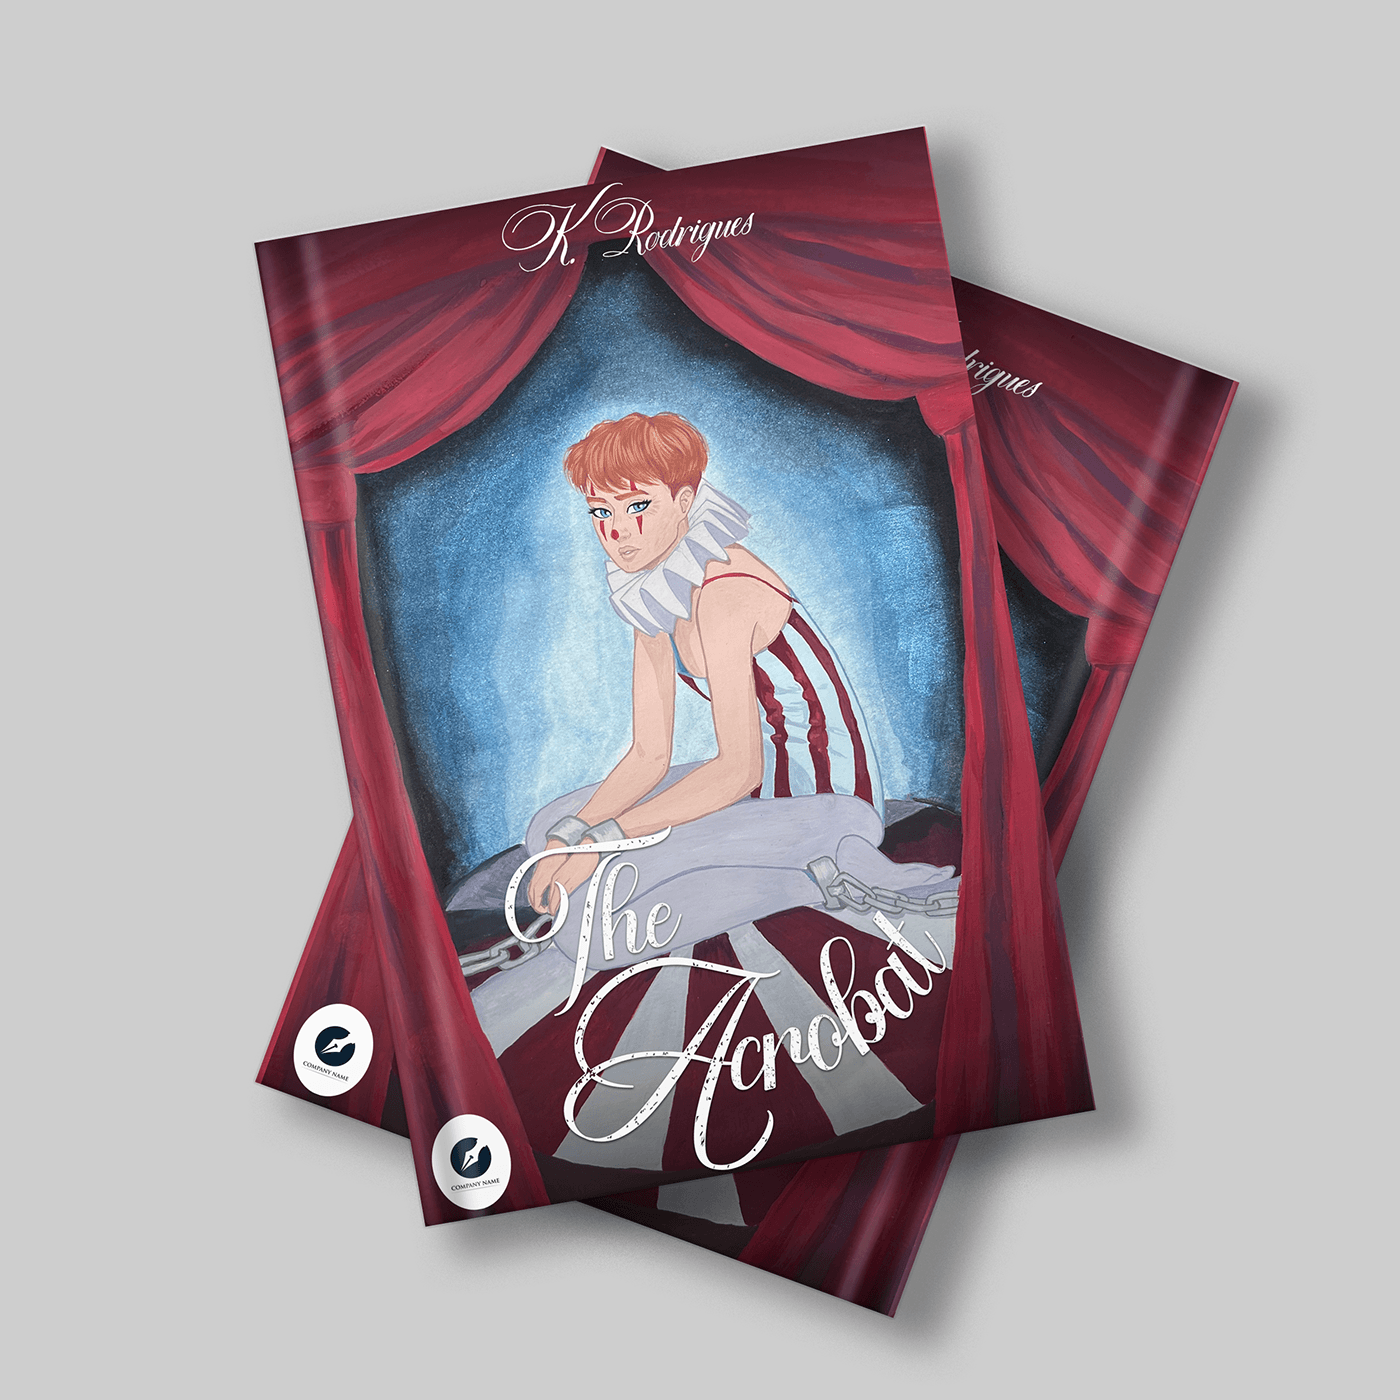 ILLUSTRATION  book cover gouache painting TRADITIONAL ART book design book illustration design photoshop book cover design